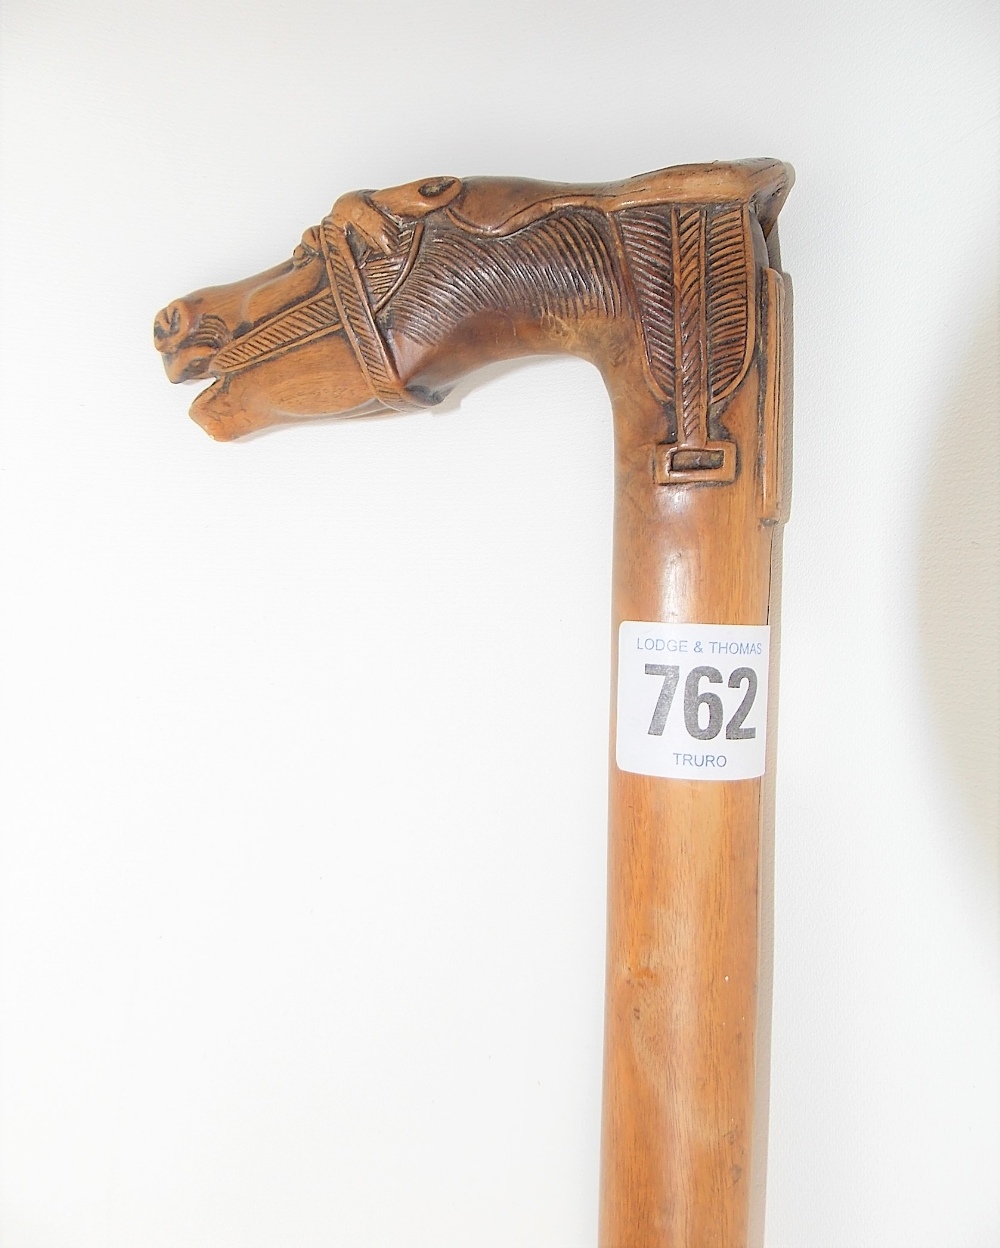 Carved wood walking cane, the handle carved as a horse head & saddle, the back with a tablet - Image 2 of 4